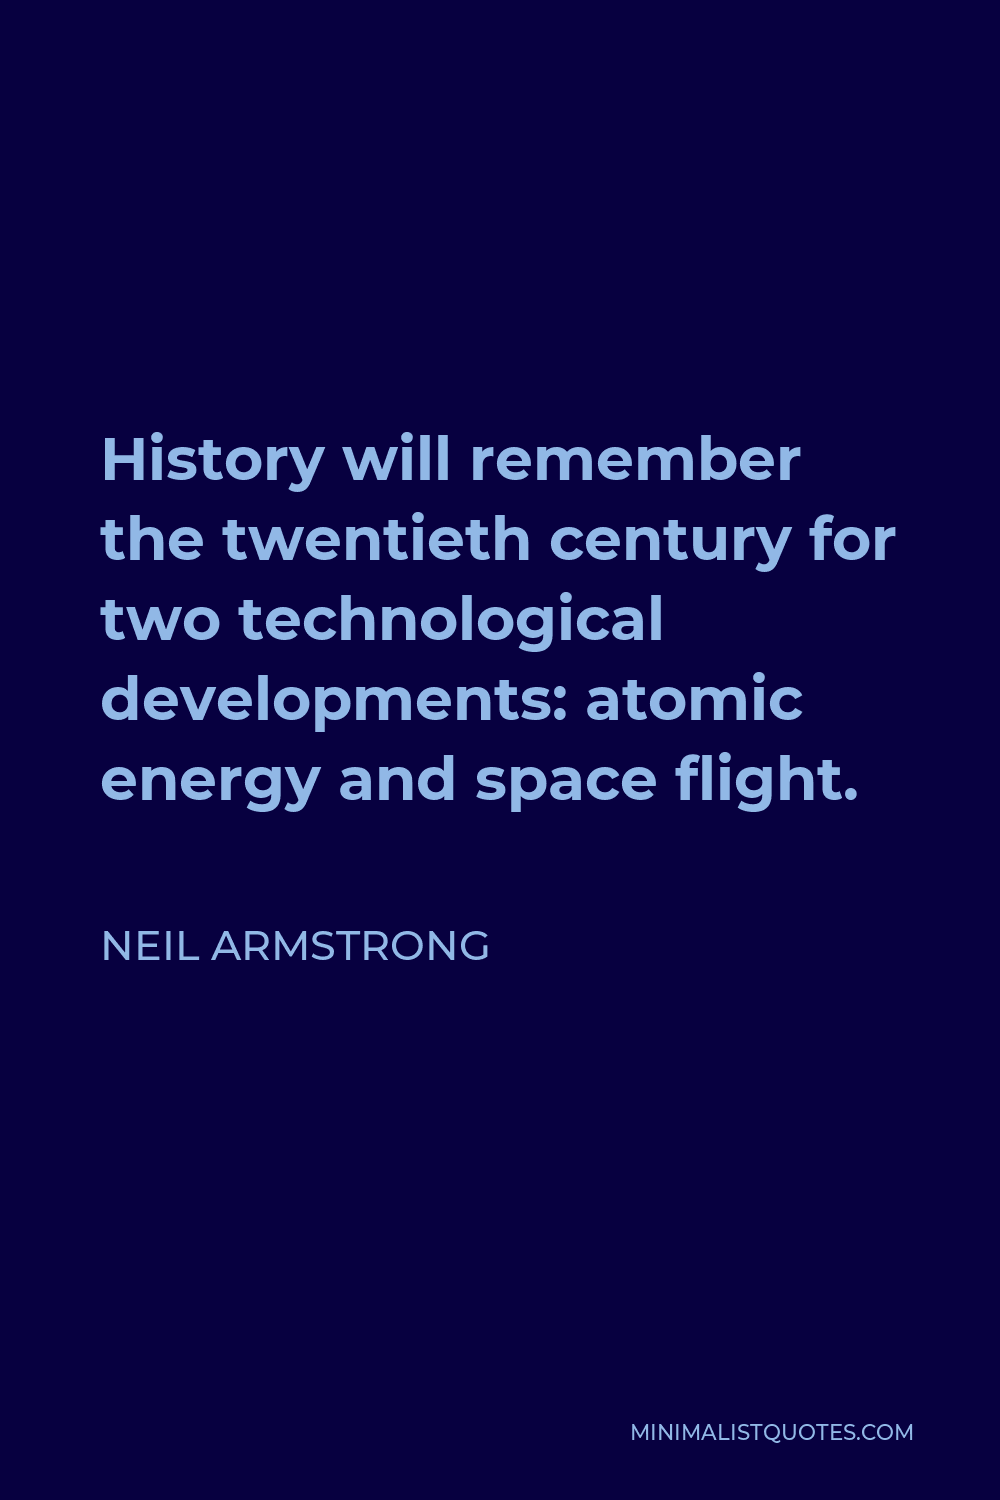 Neil Armstrong Quote - History will remember the twentieth century for two technological developments: atomic energy and space flight.